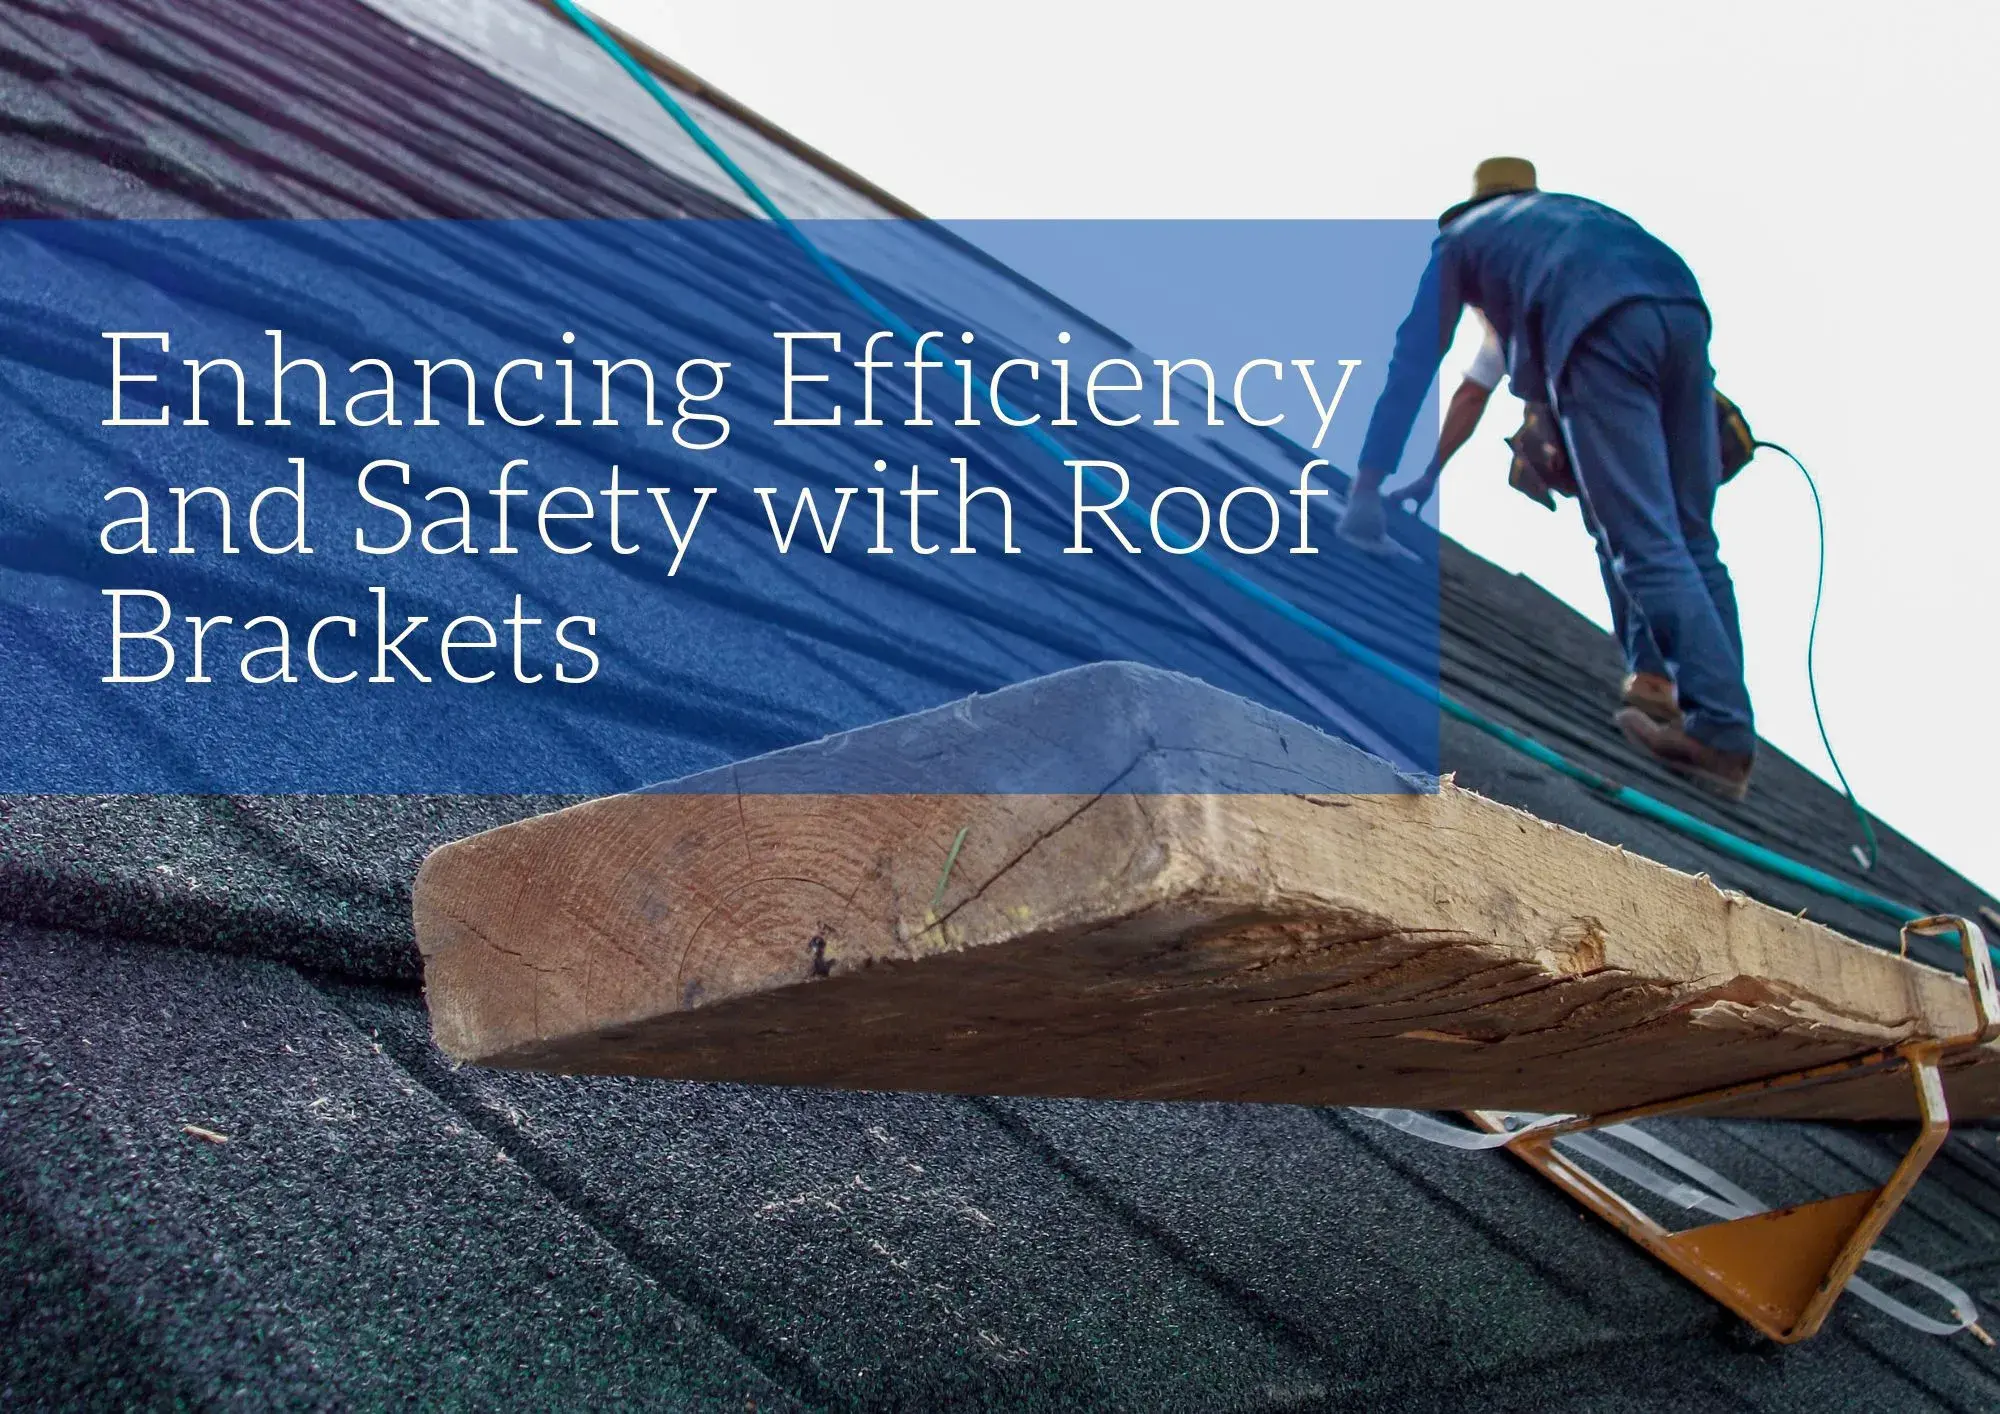 Enhancing Efficiency and Safety with Roof Brackets